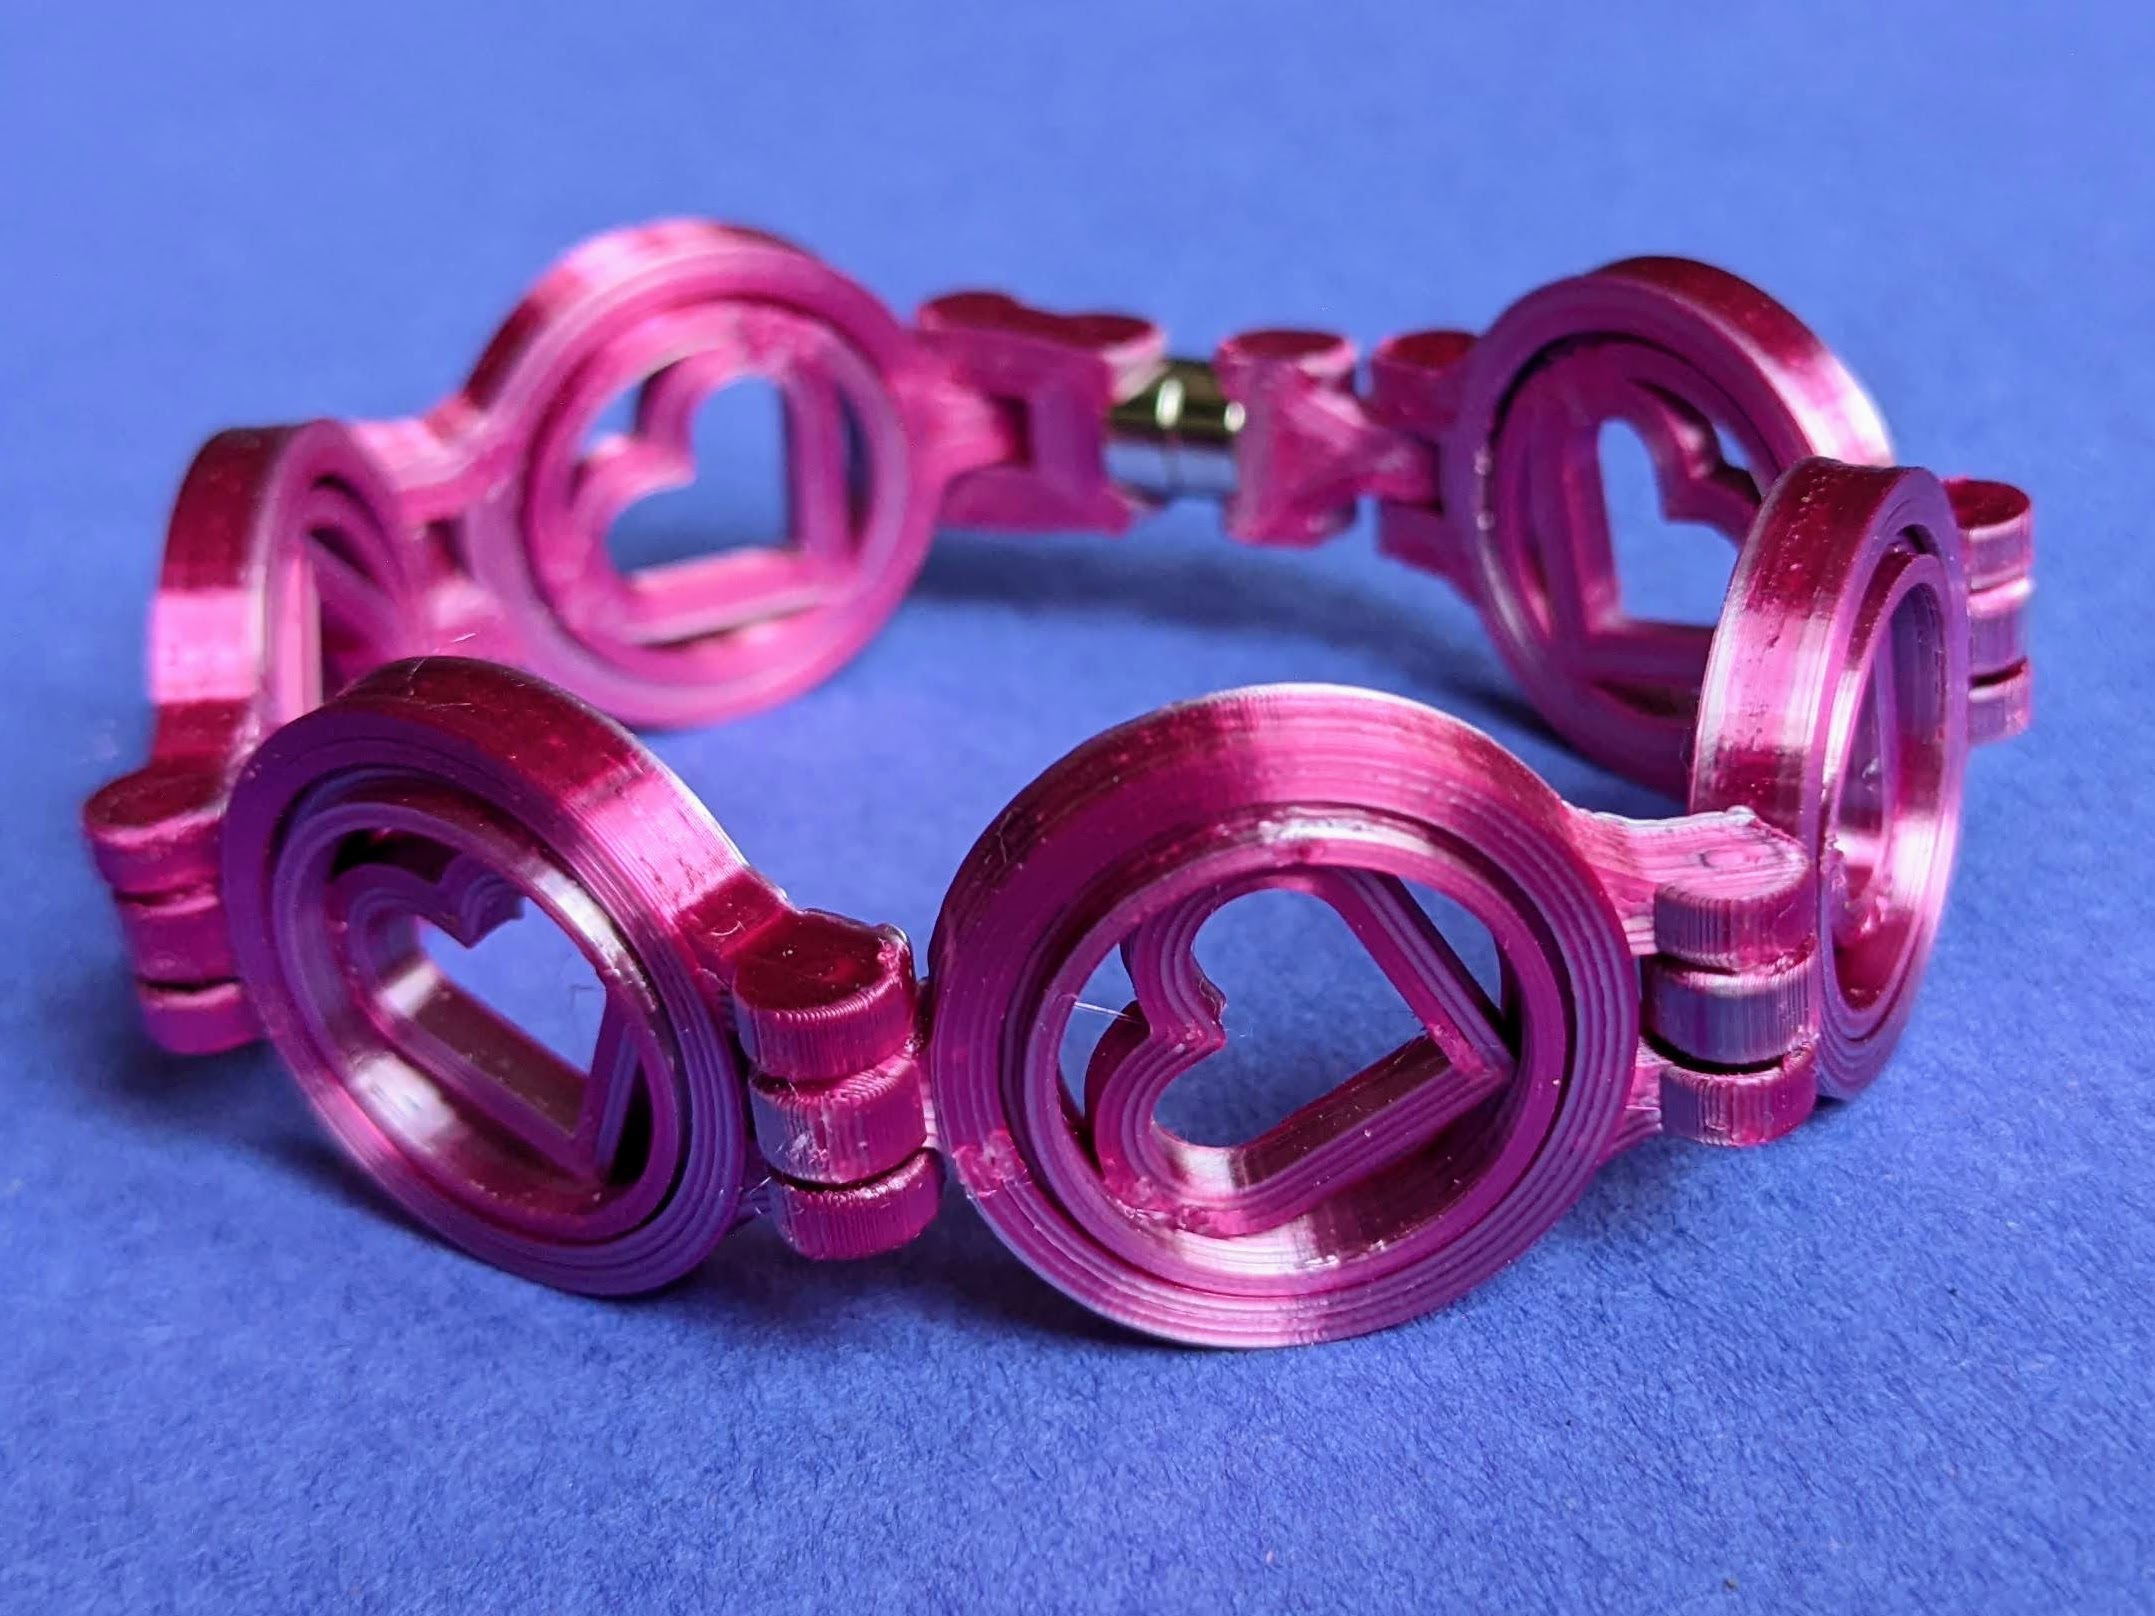 Print In Place Rotating Hearts Bracelet